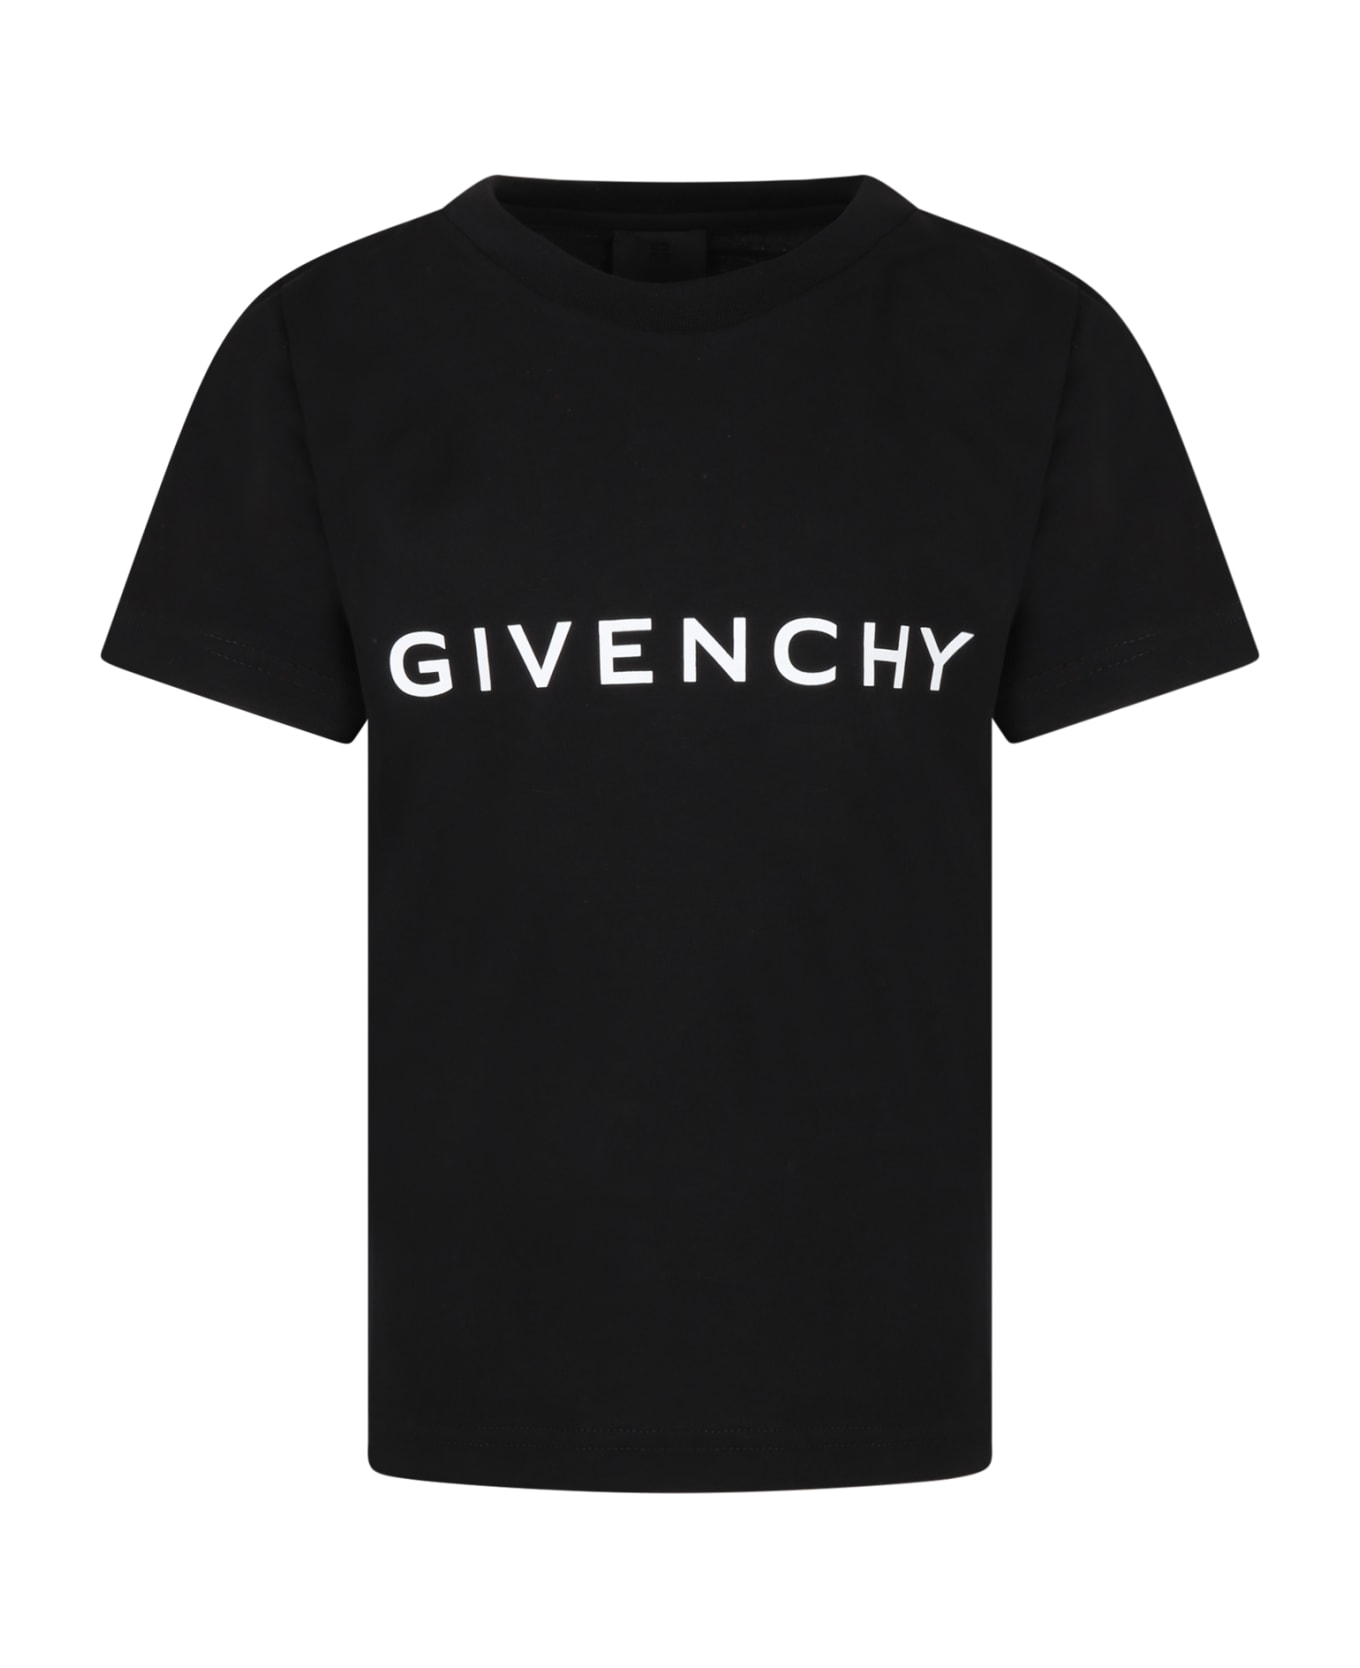 Givenchy Black T-shirt For Boy With White Logo - Black